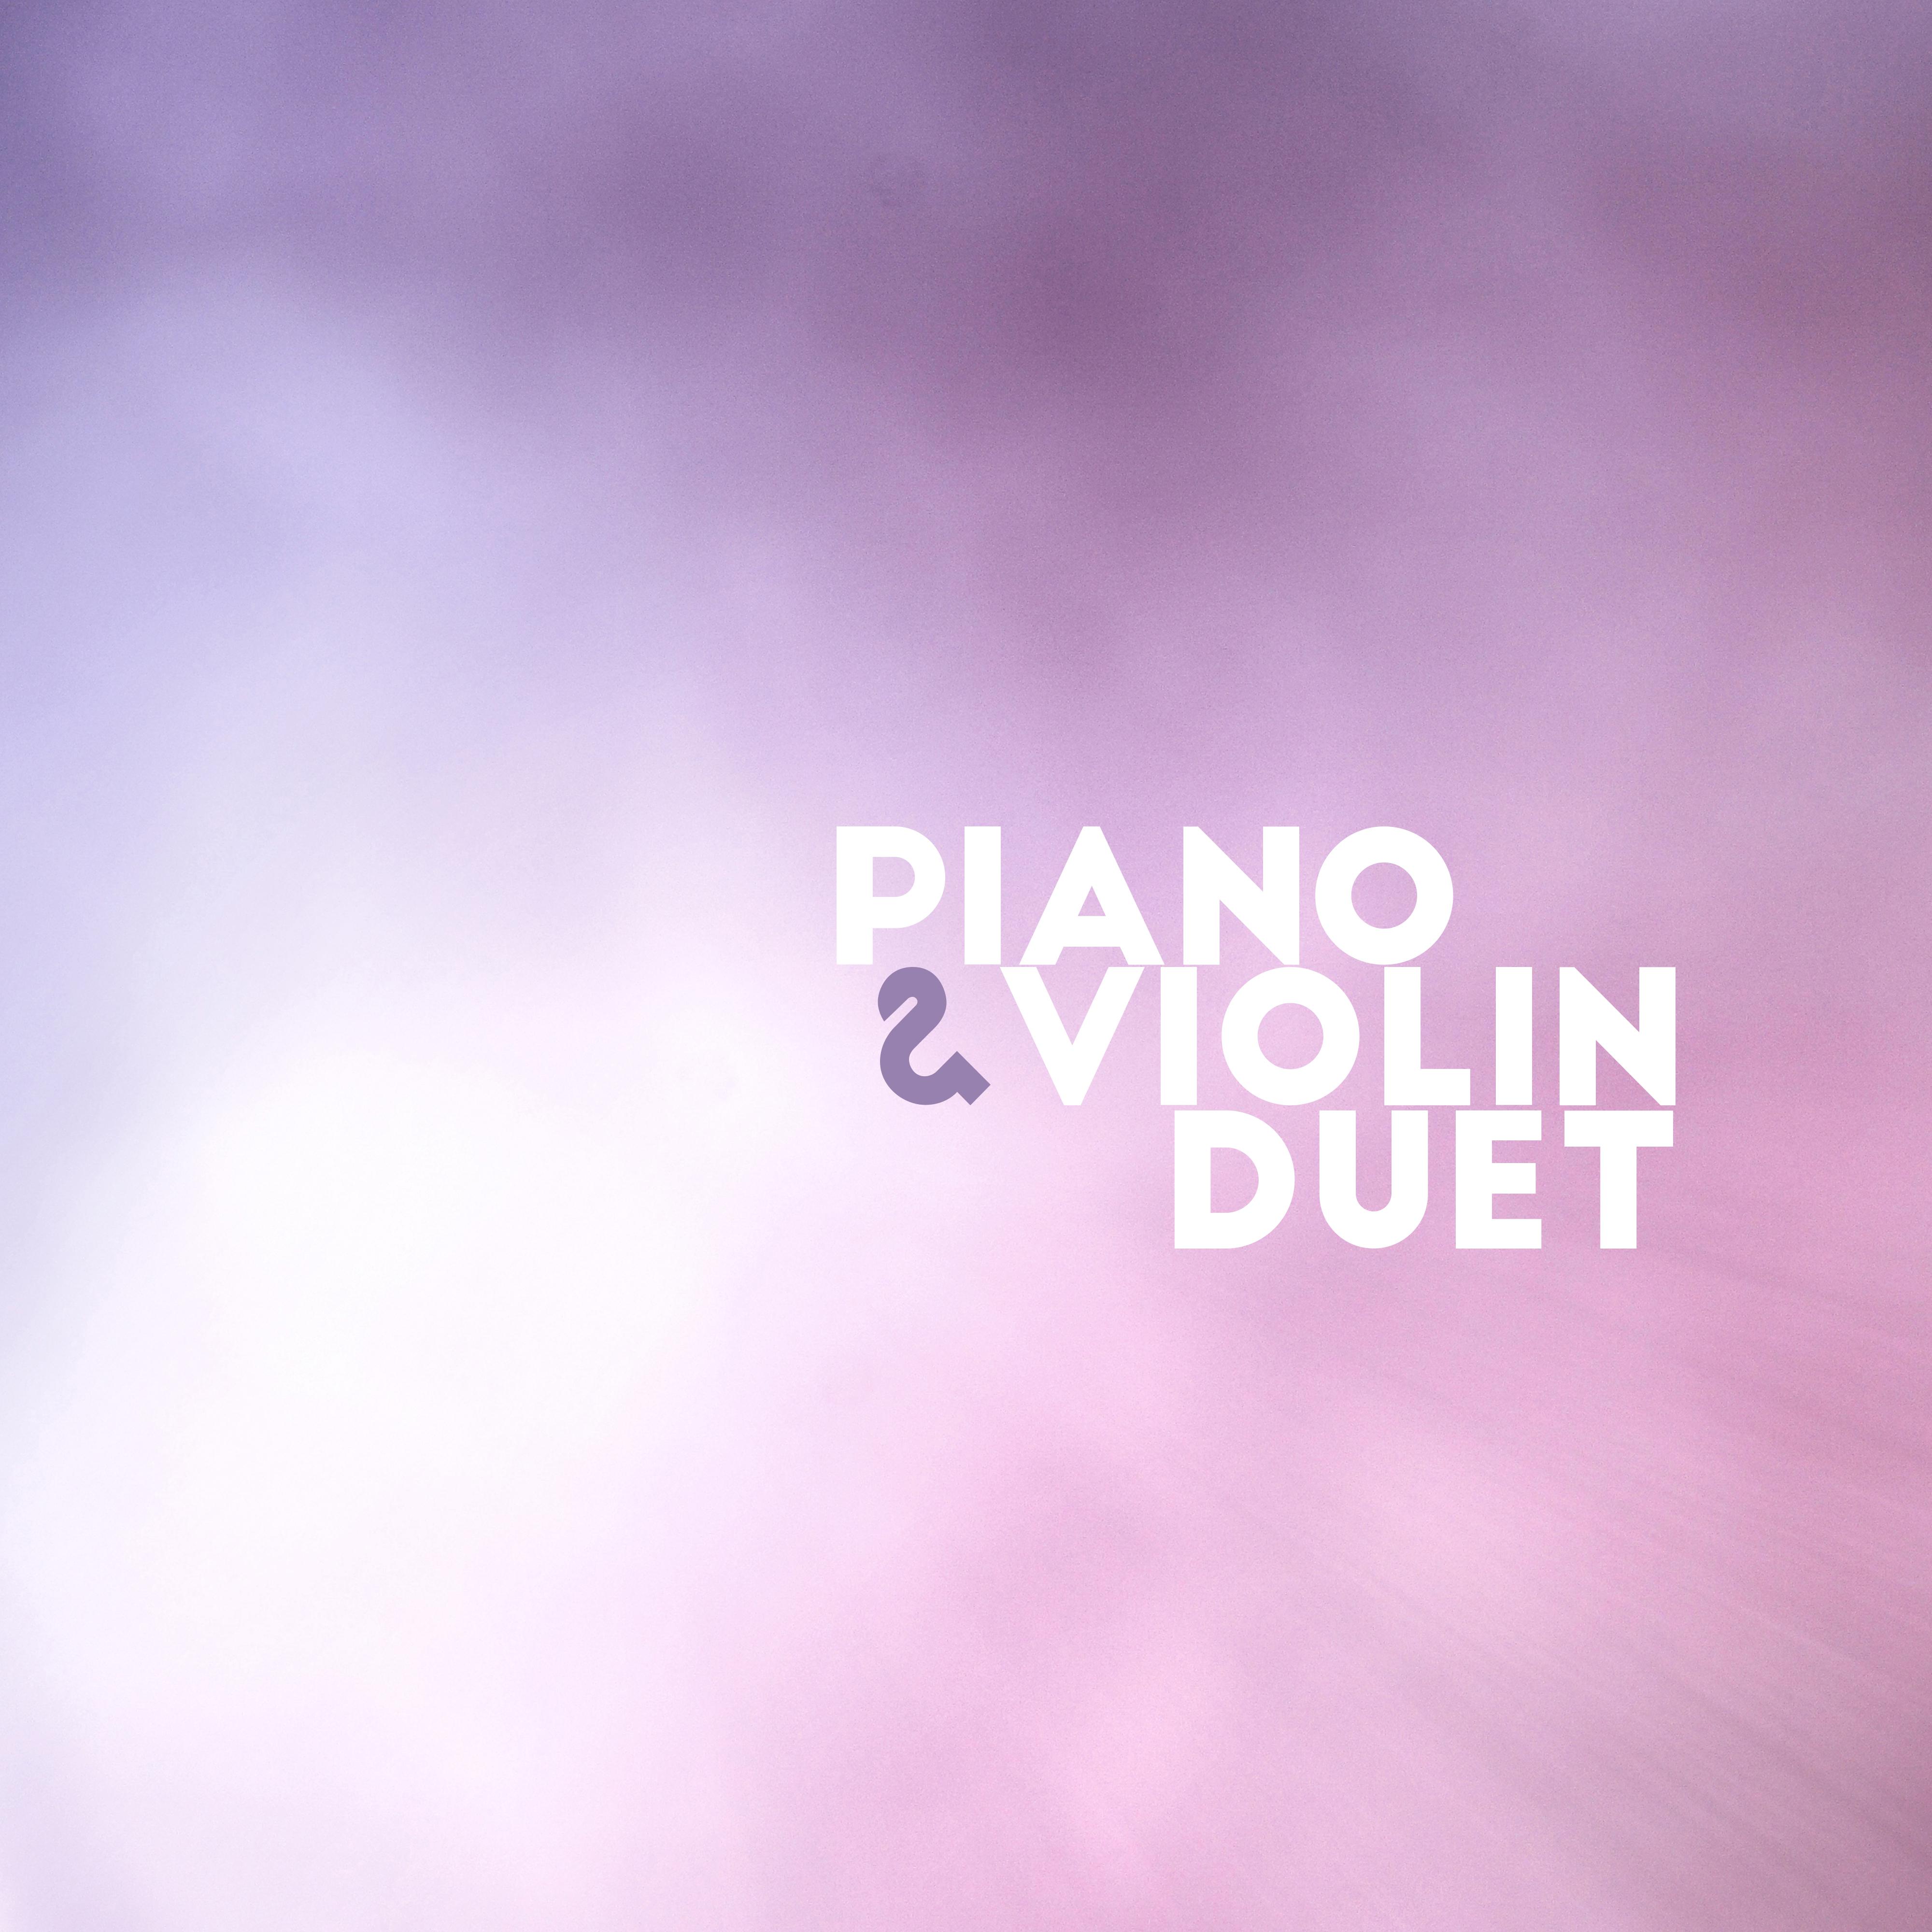 Piano & Violin Duet: 14 Instrumental Covers of the Most Famous Songs